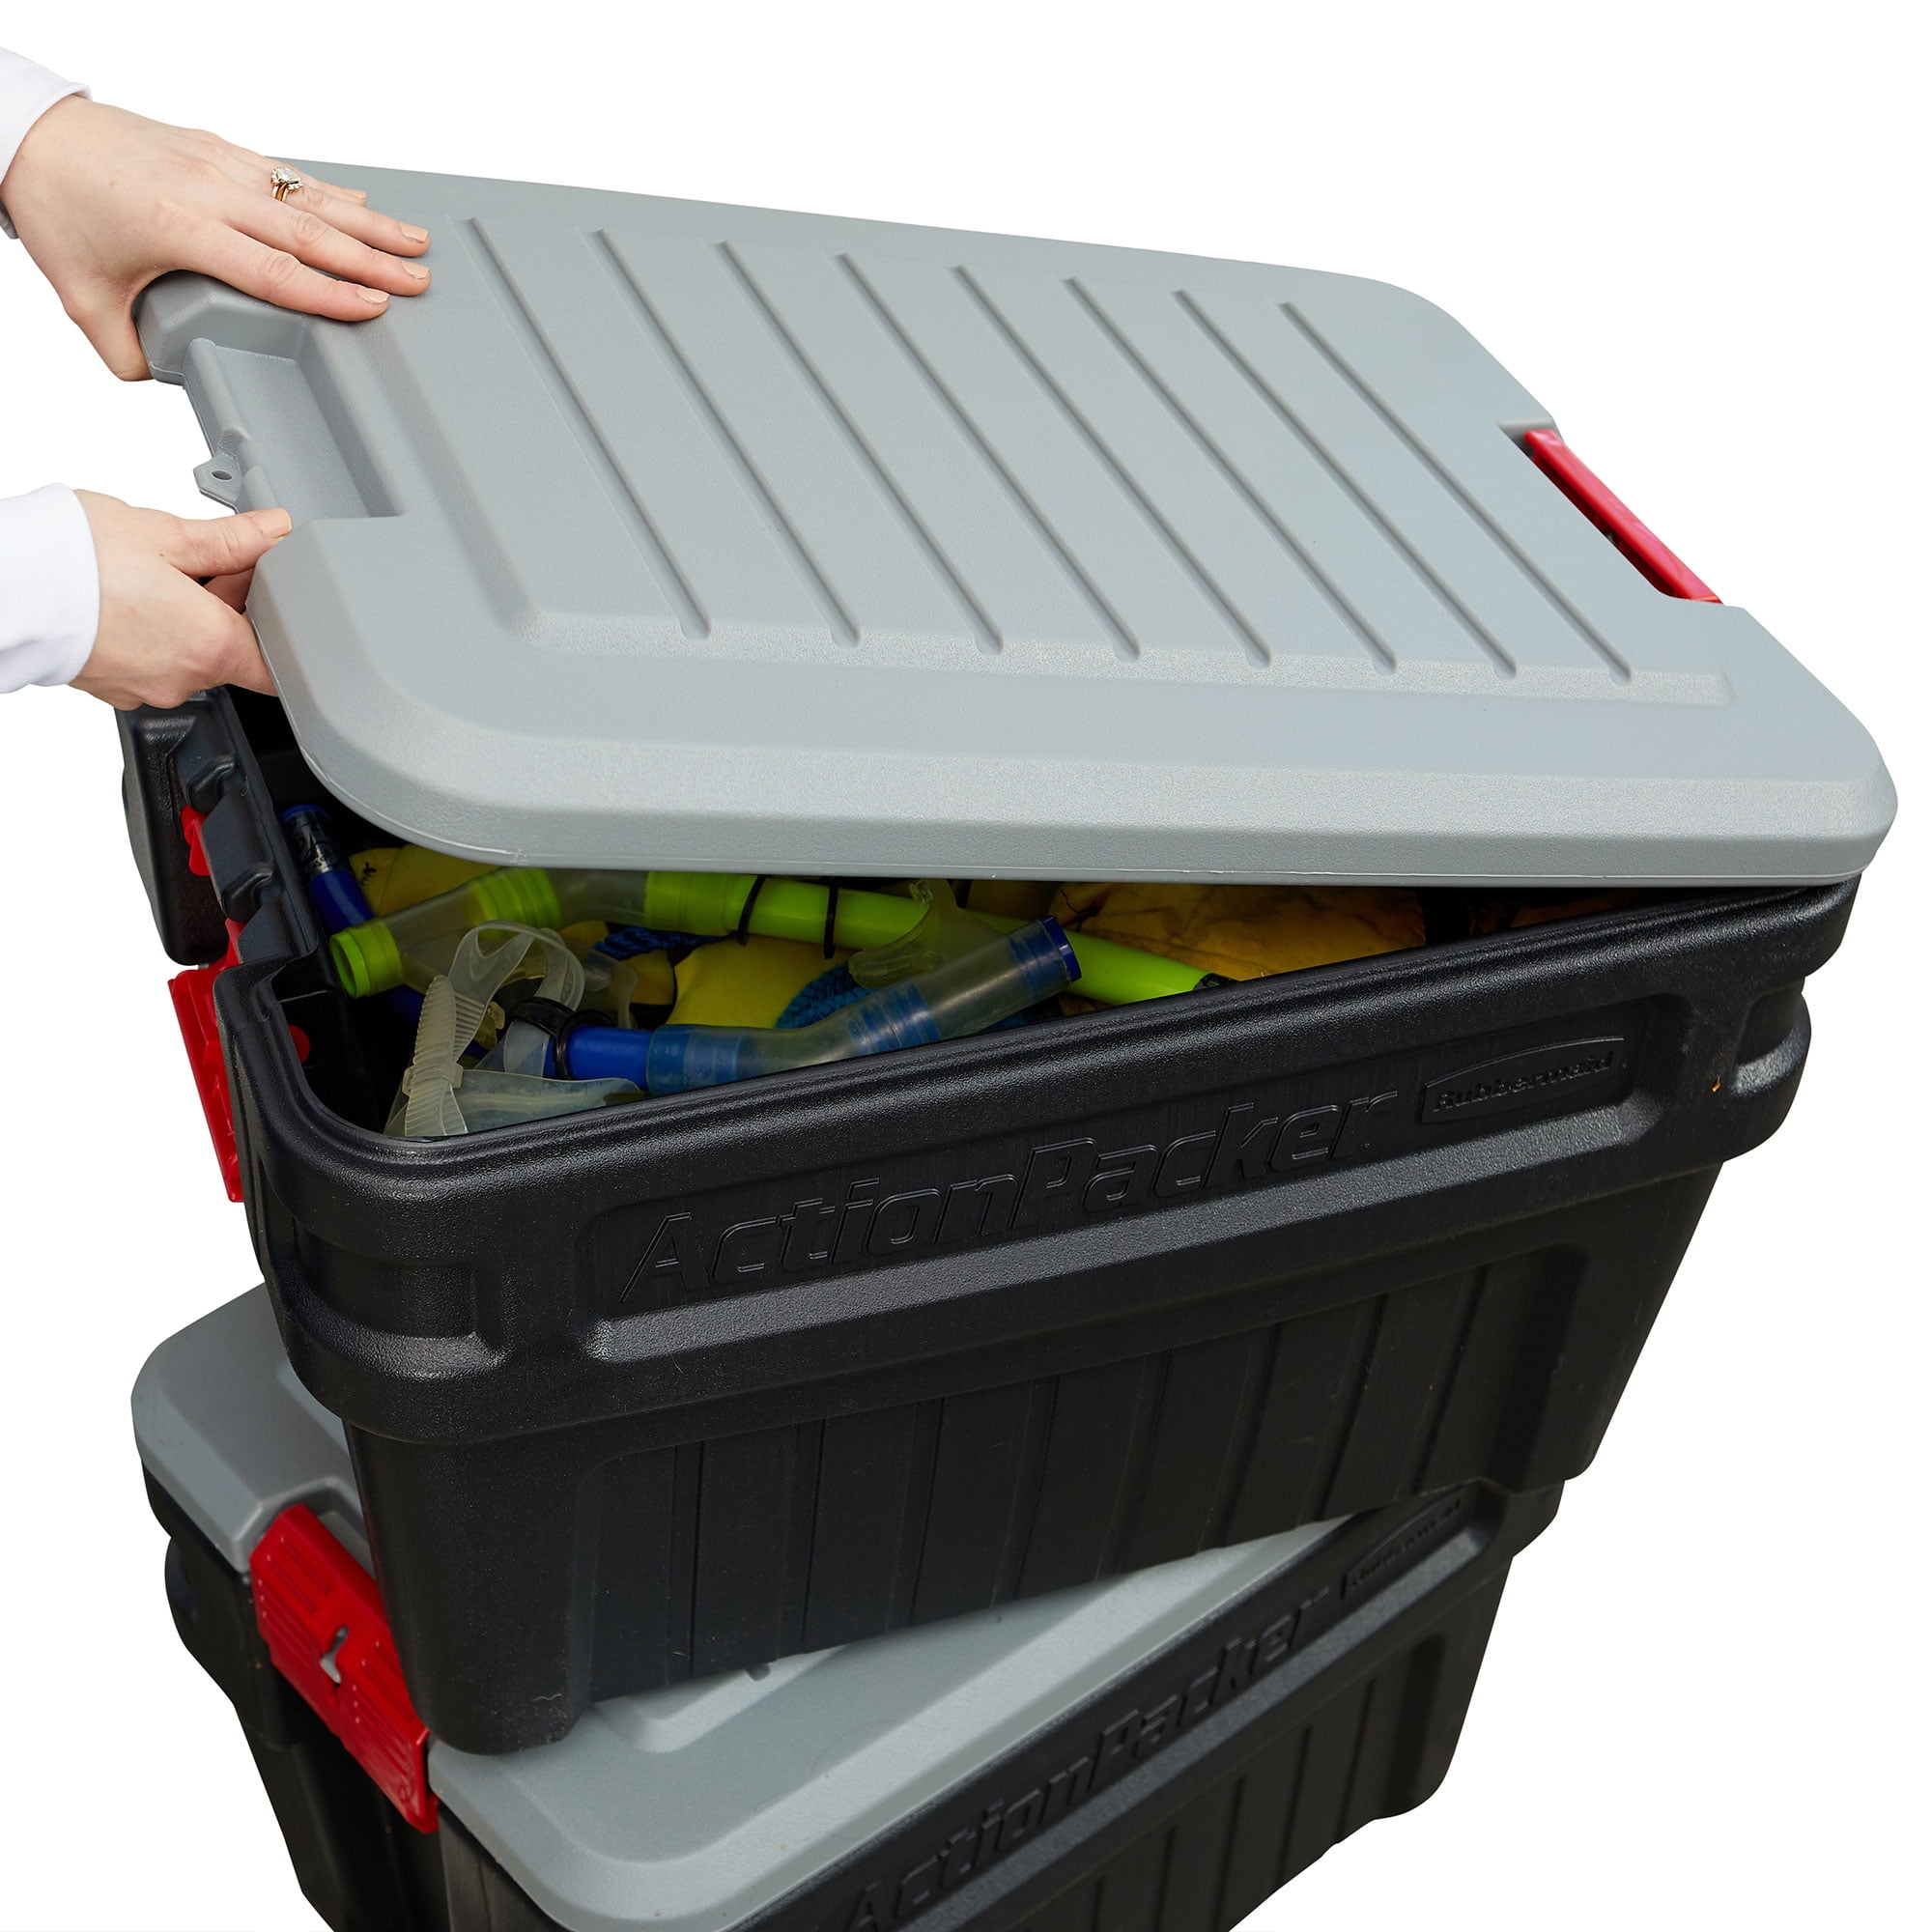 Rubbermaid action packer container model 1171 for Sale in Queens